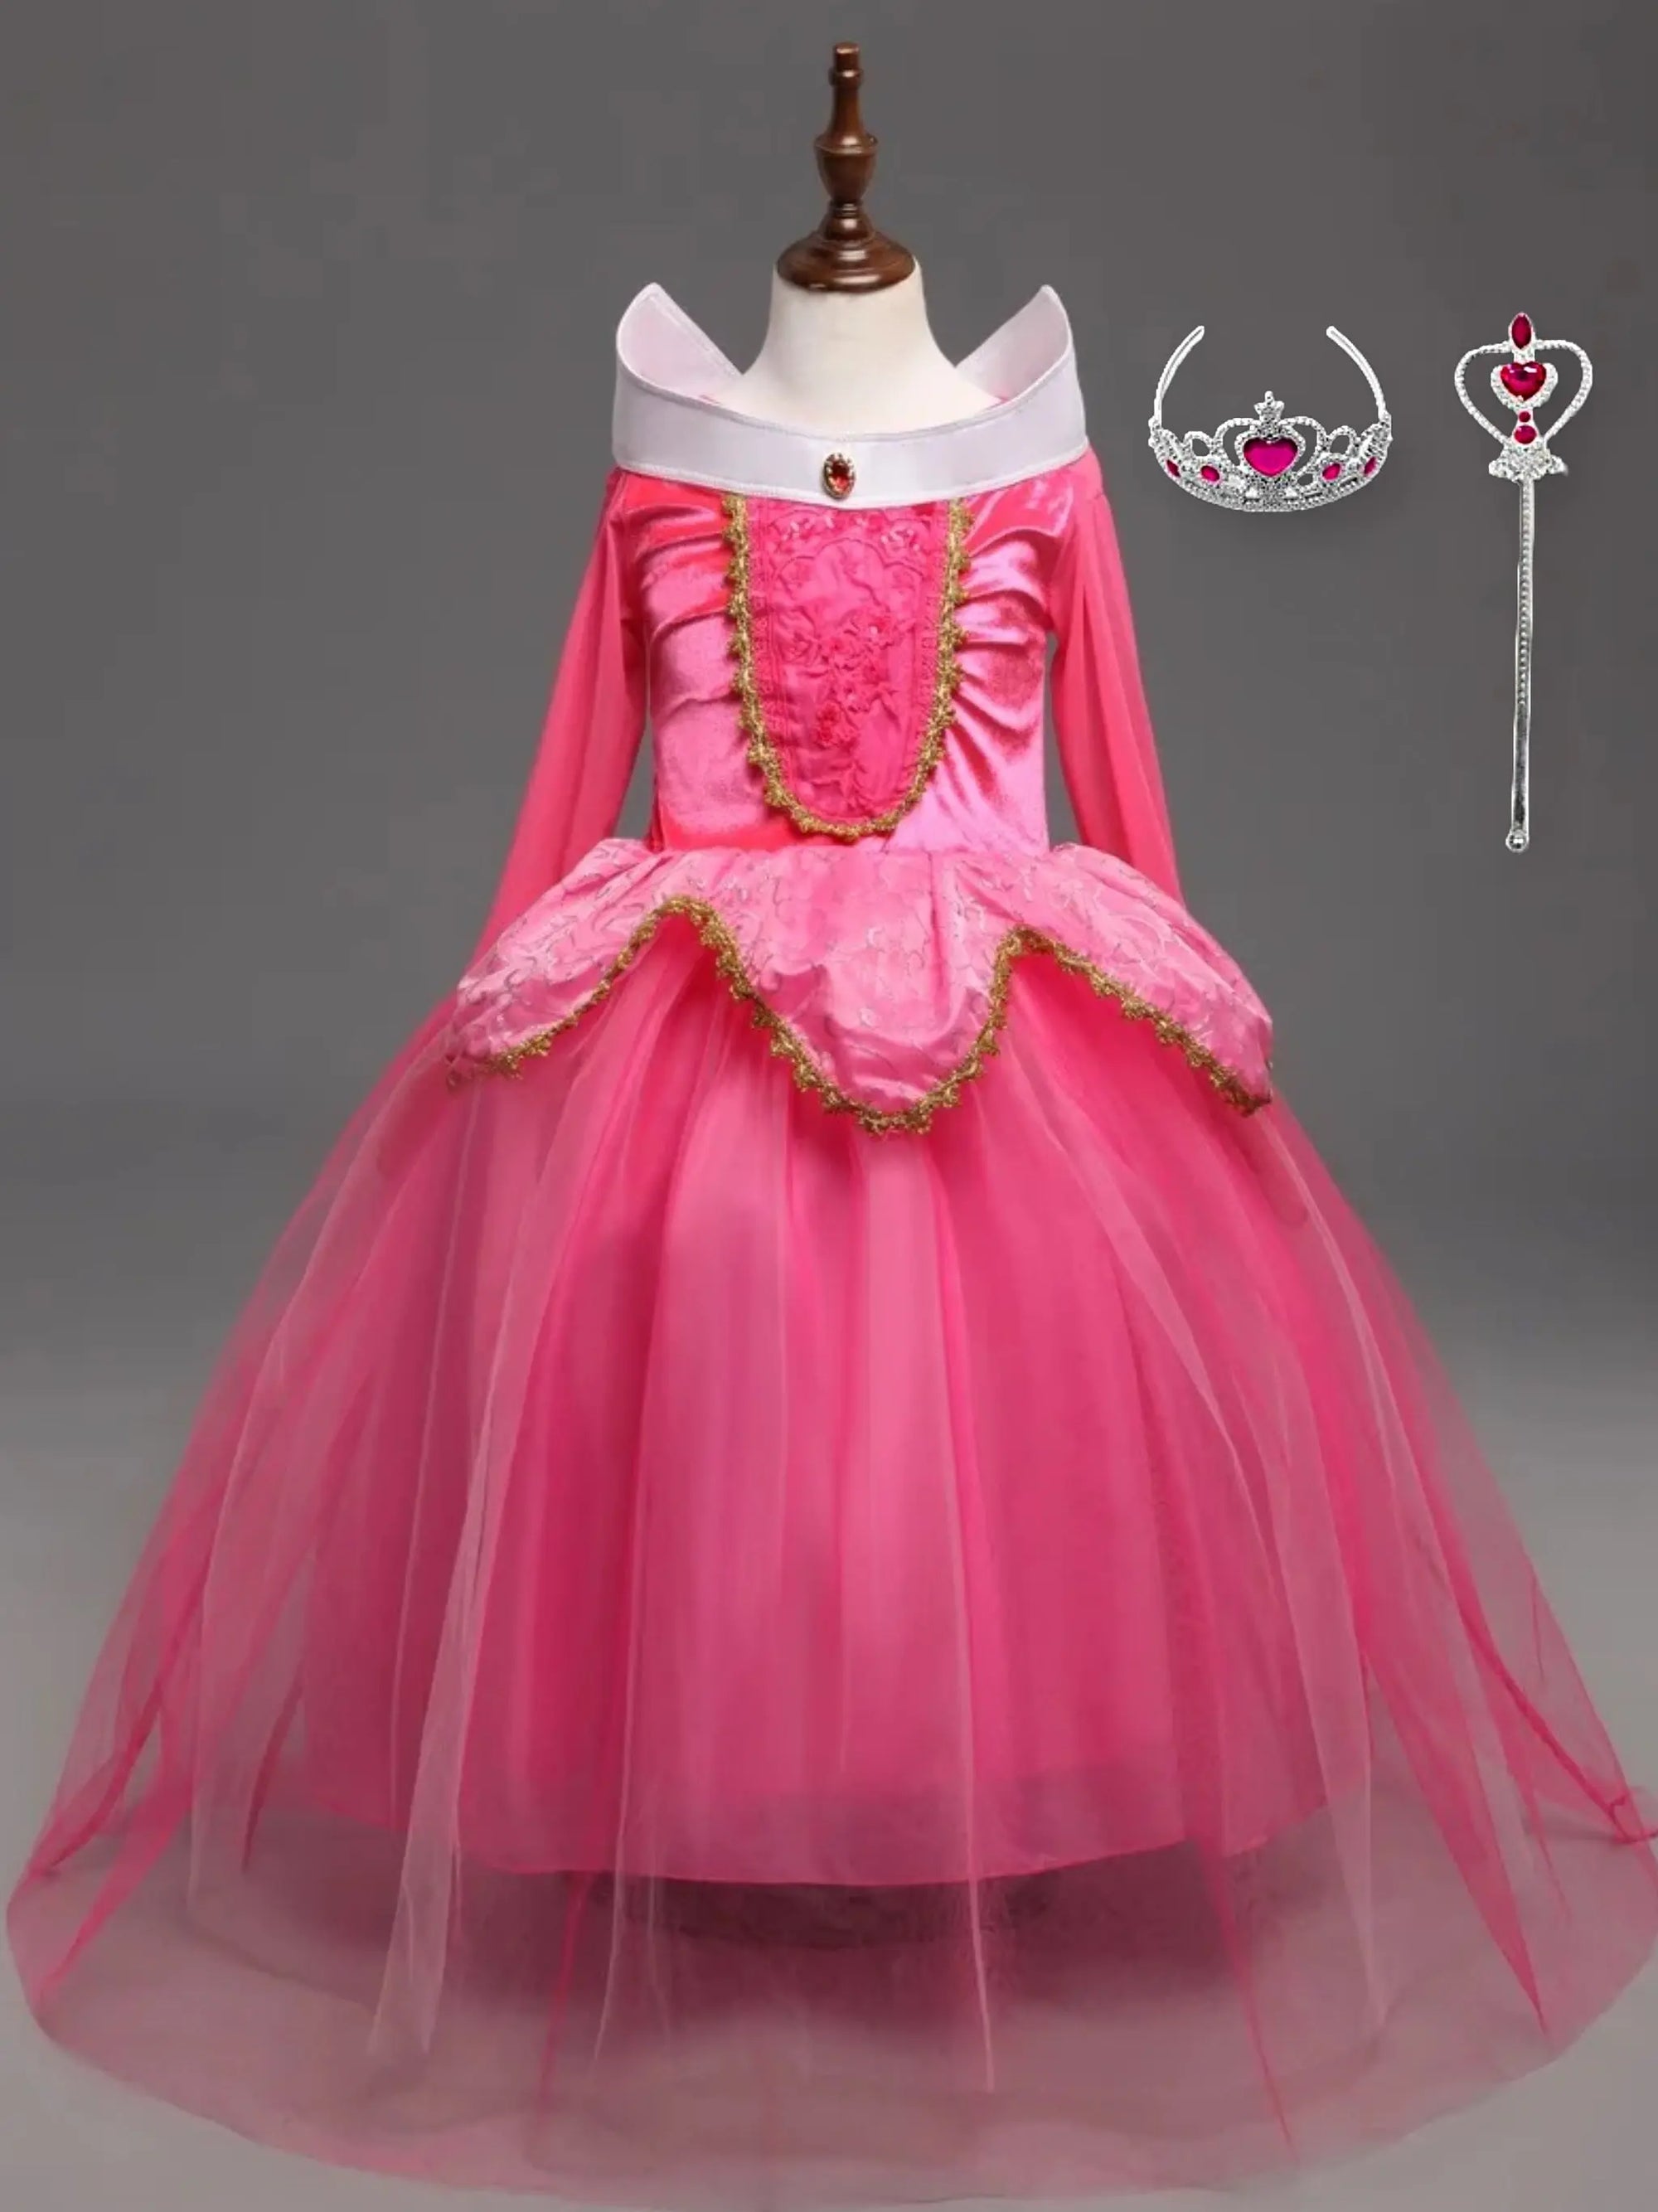 Girls Princess Aurora Sleeping Beauty Costume Dress with Accessories Bling Bling Baby Boutique